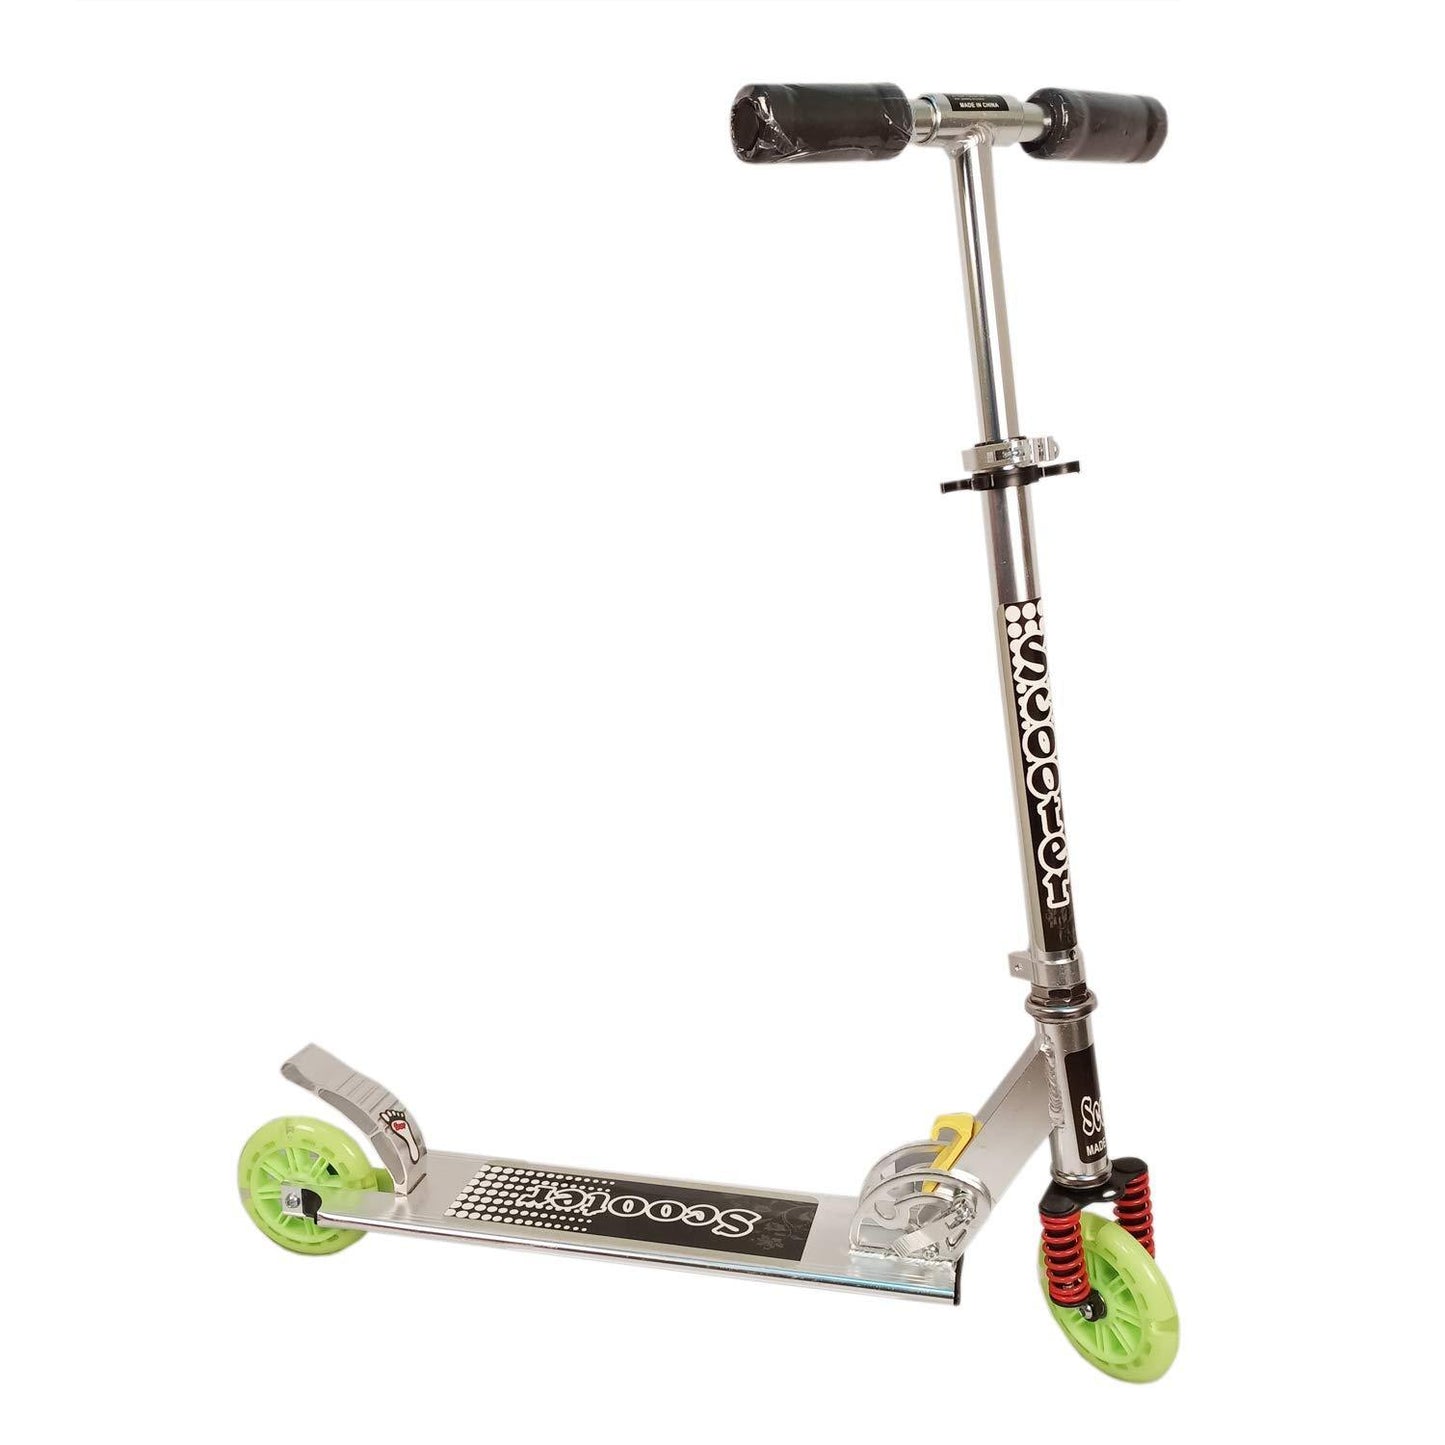 Prokick Road Runner Scooter for Kids of 3 to 14 Years Age - 75 KG Capacity (Green) - Best Price online Prokicksports.com